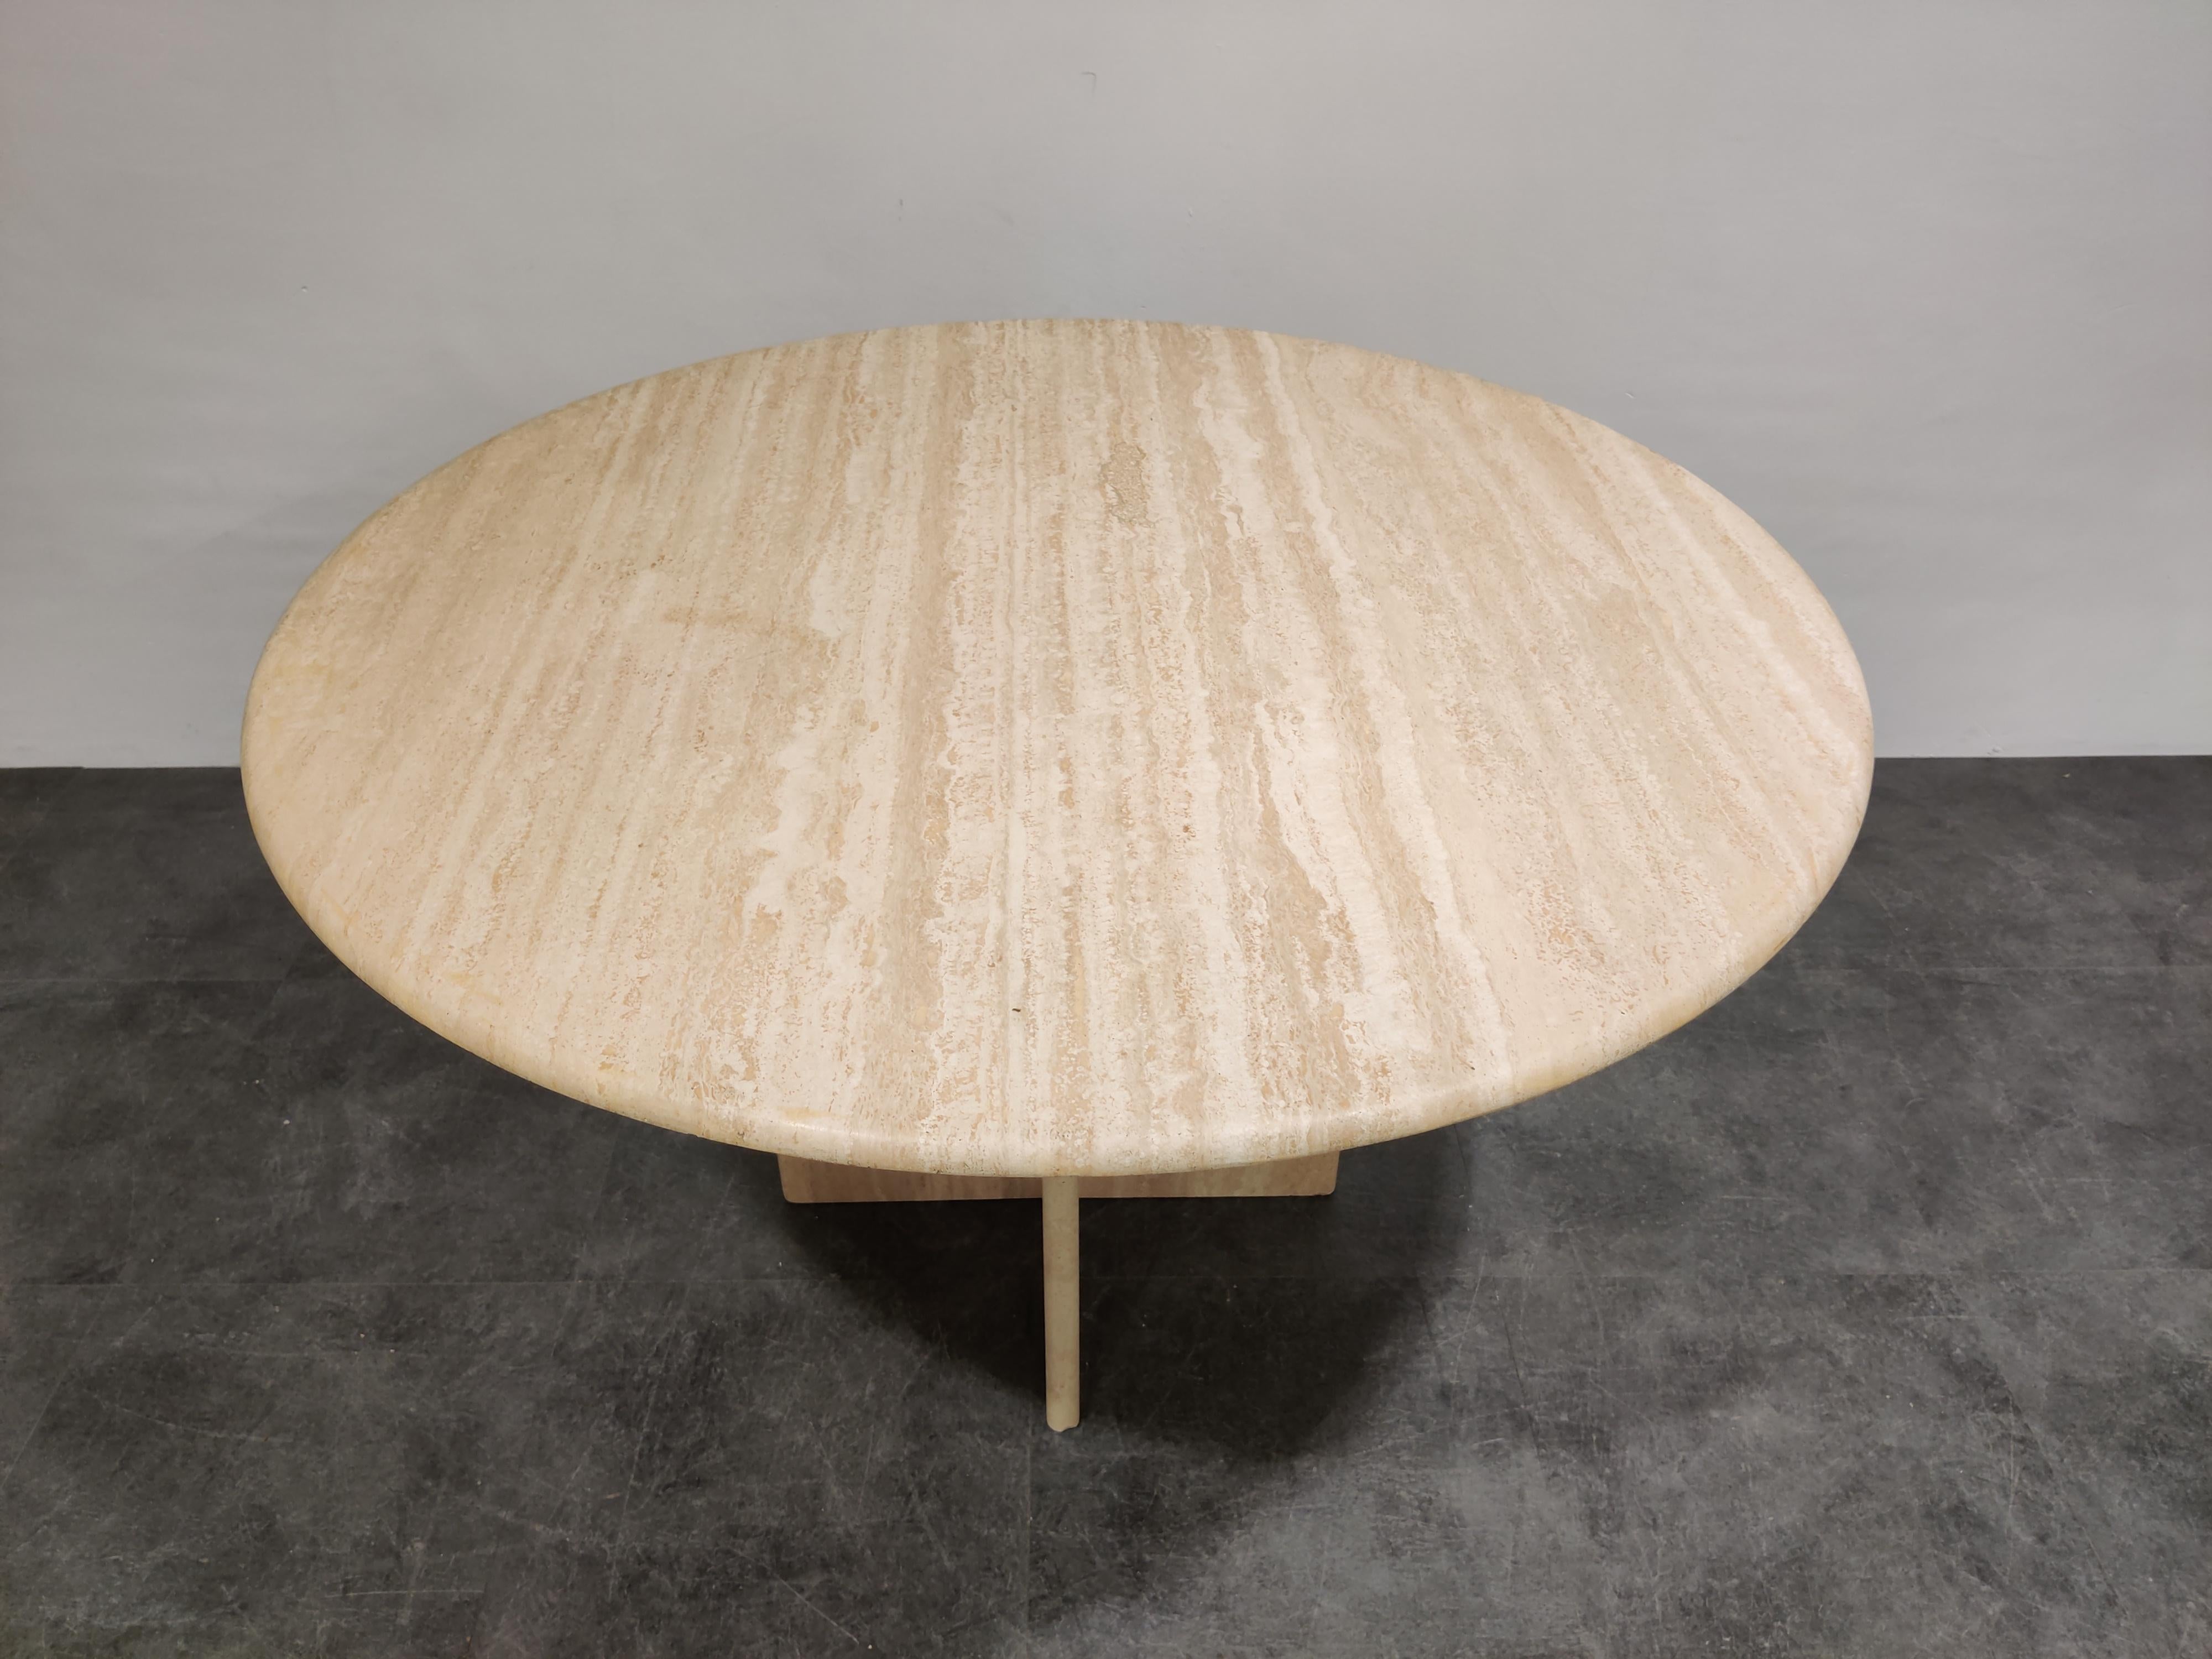 Beautiful dining table made from travertine stone.

Lovely natural vains in the stone.

Nicely finished round top - X shpaed base.

Good condition, slight chip to the base.

1970s - Italy

Measures: Height: 74cm/29.13